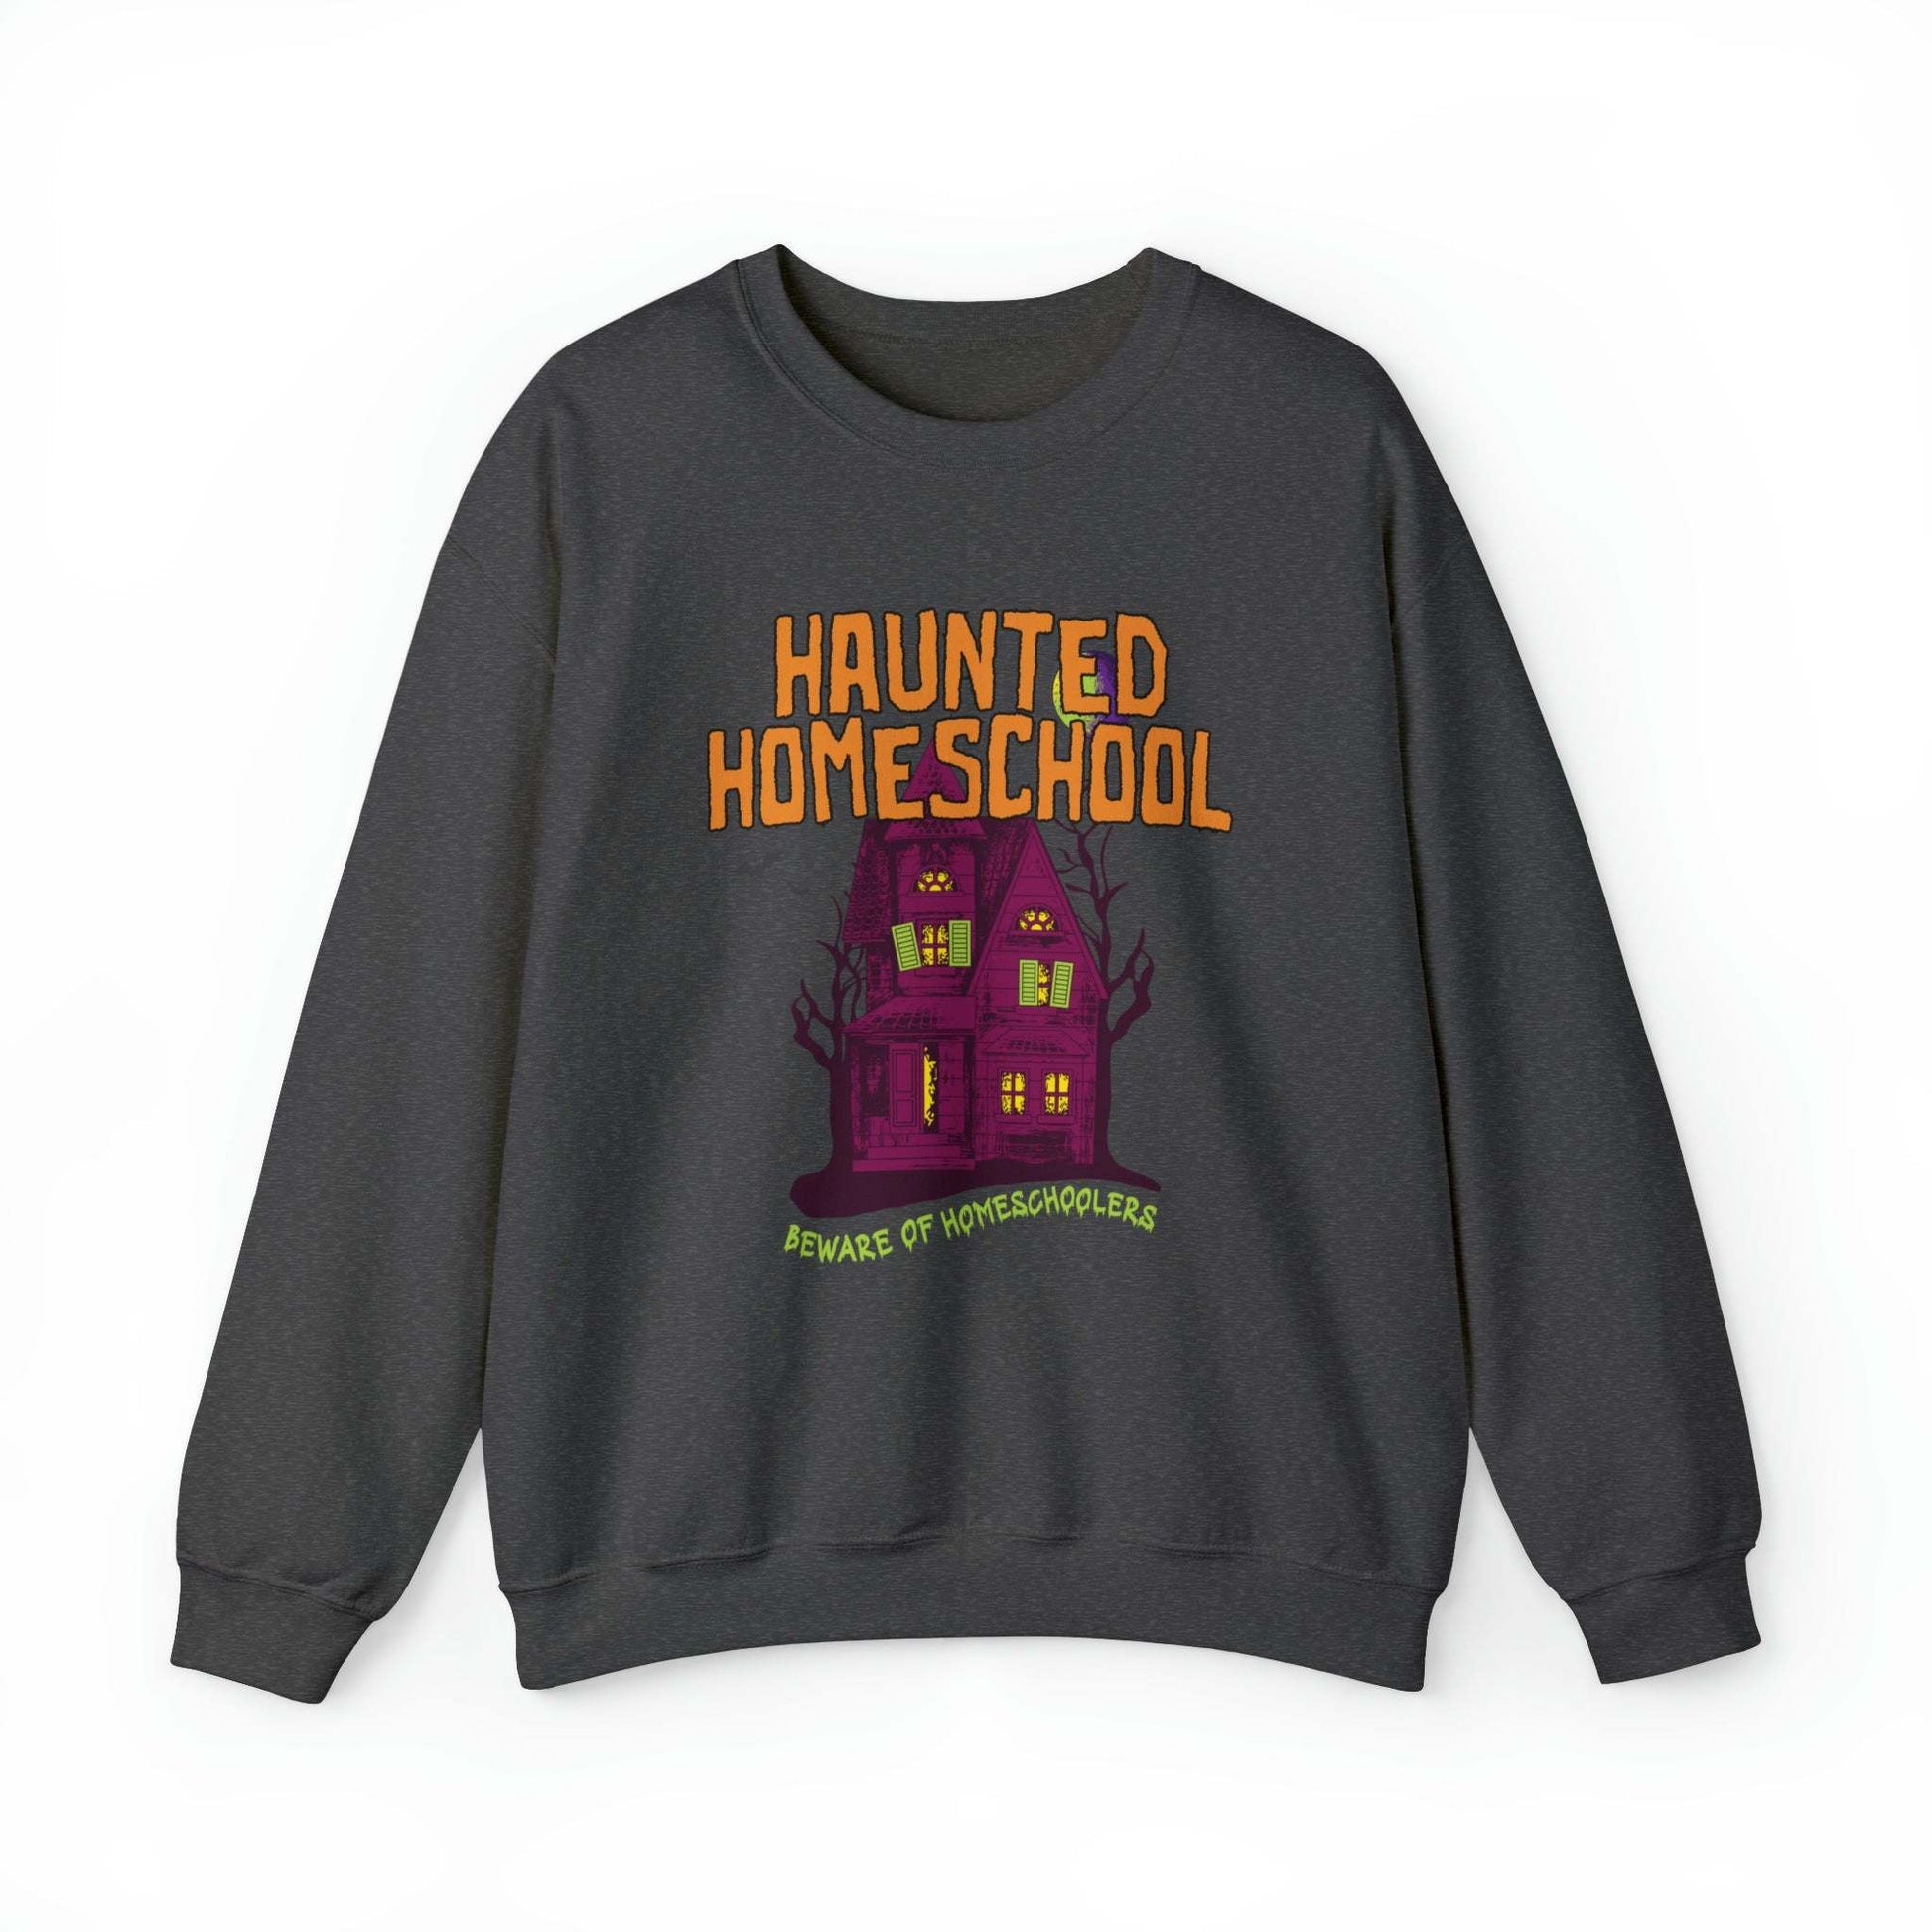 Haunted Homeschool Adult Crewneck SweatshirtWolfe Paw DesignsHaunted Homeschool Adult Crewneck SweatshirtBeware of homeschoolers!
Also available as a tee.
Gildan Unisex Fit
50% cotton, 50% polyester



 
S
M
L
XL
2XL
3XL
4XL
5XL




Width, in
20.00
22.01
24.00
26.00
28.Haunted Homeschool Adult Crewneck Sweatshirt